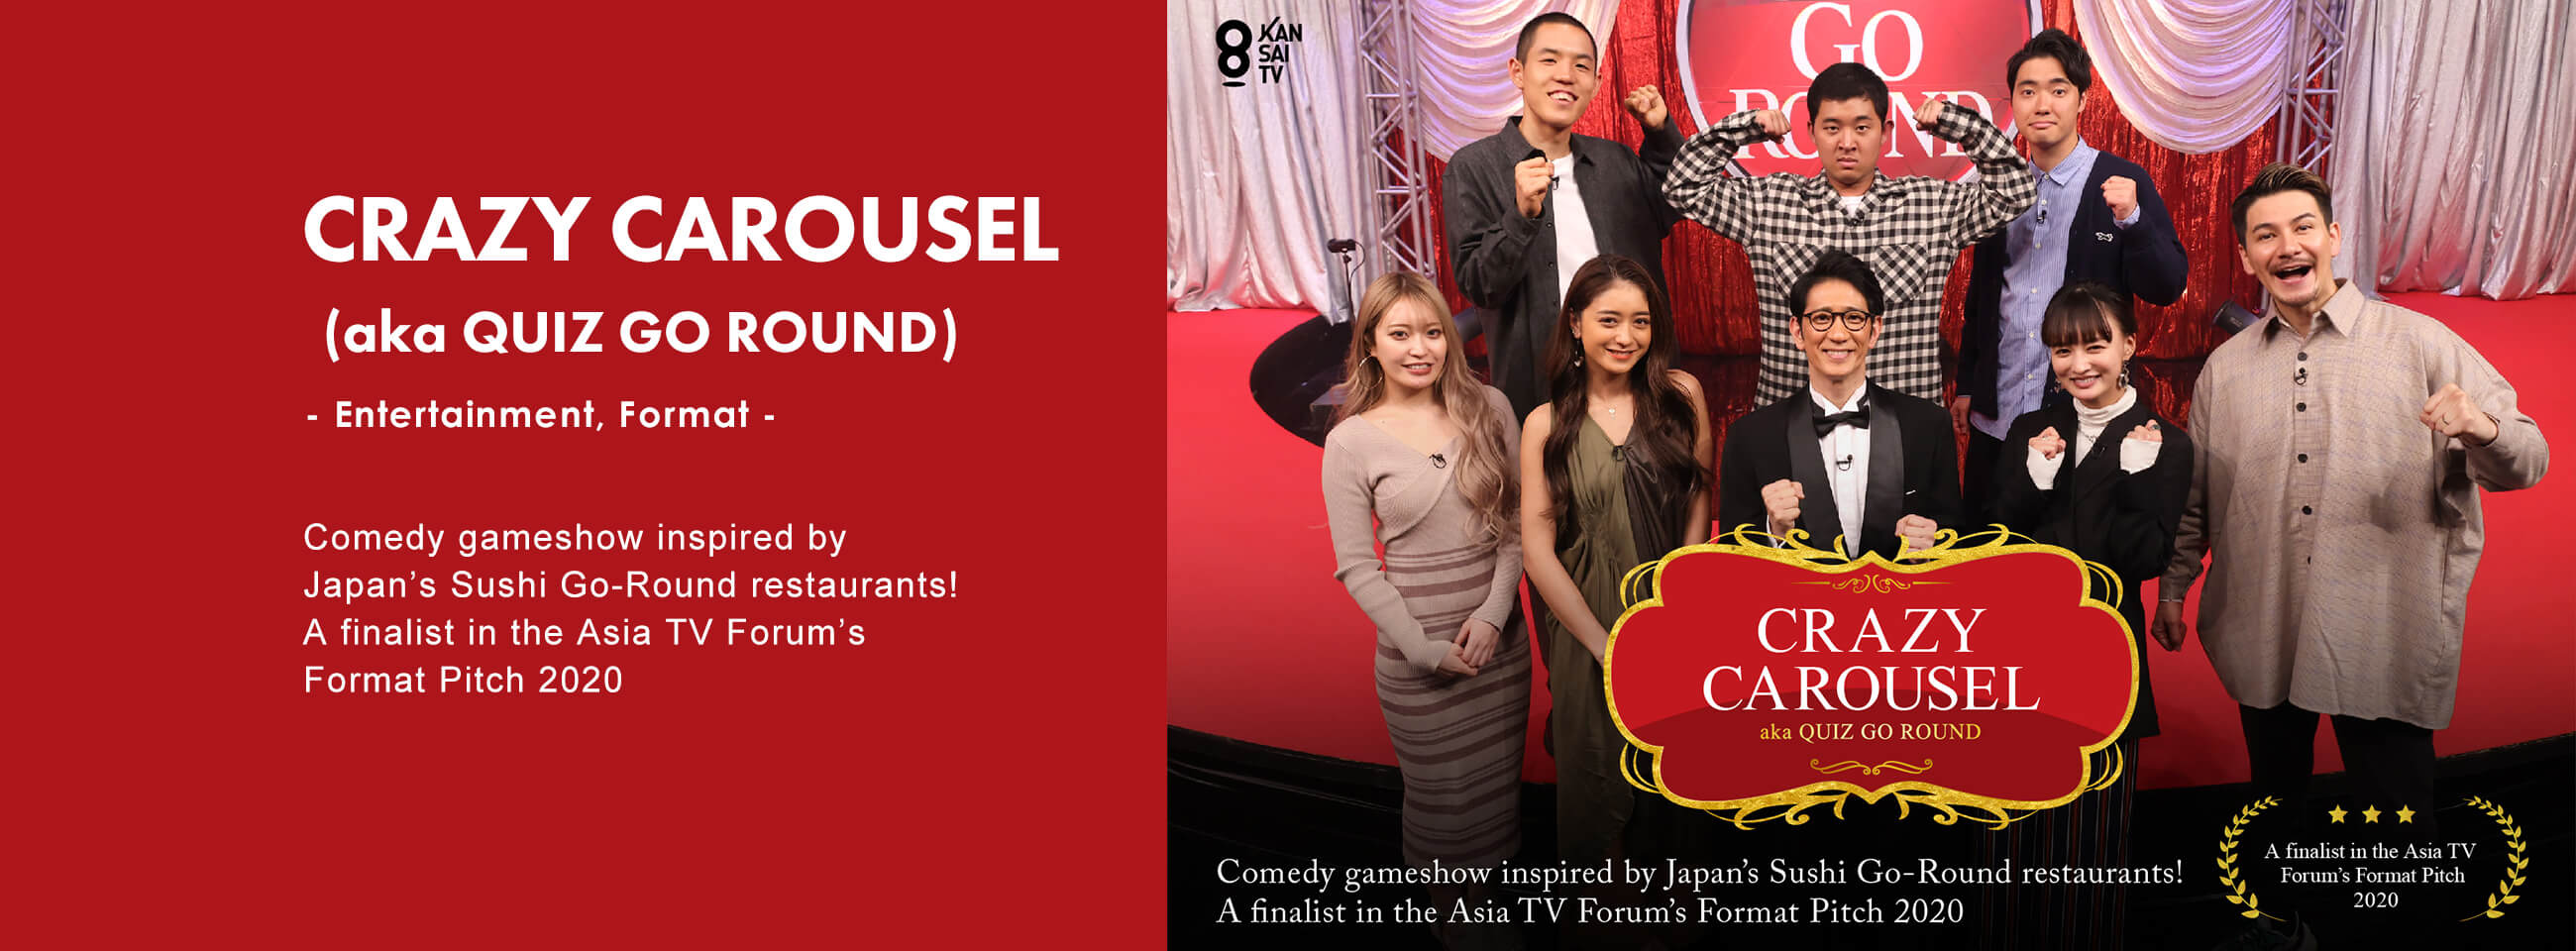 CRAZY CAROUSEL (aka QUIZ GO ROUND) - Entertainment, Format - Comedy gameshow inspired by Japan’s Sushi Go-Round restaurants! A finalist in the Asia TV Forum’s Format Pitch 2020